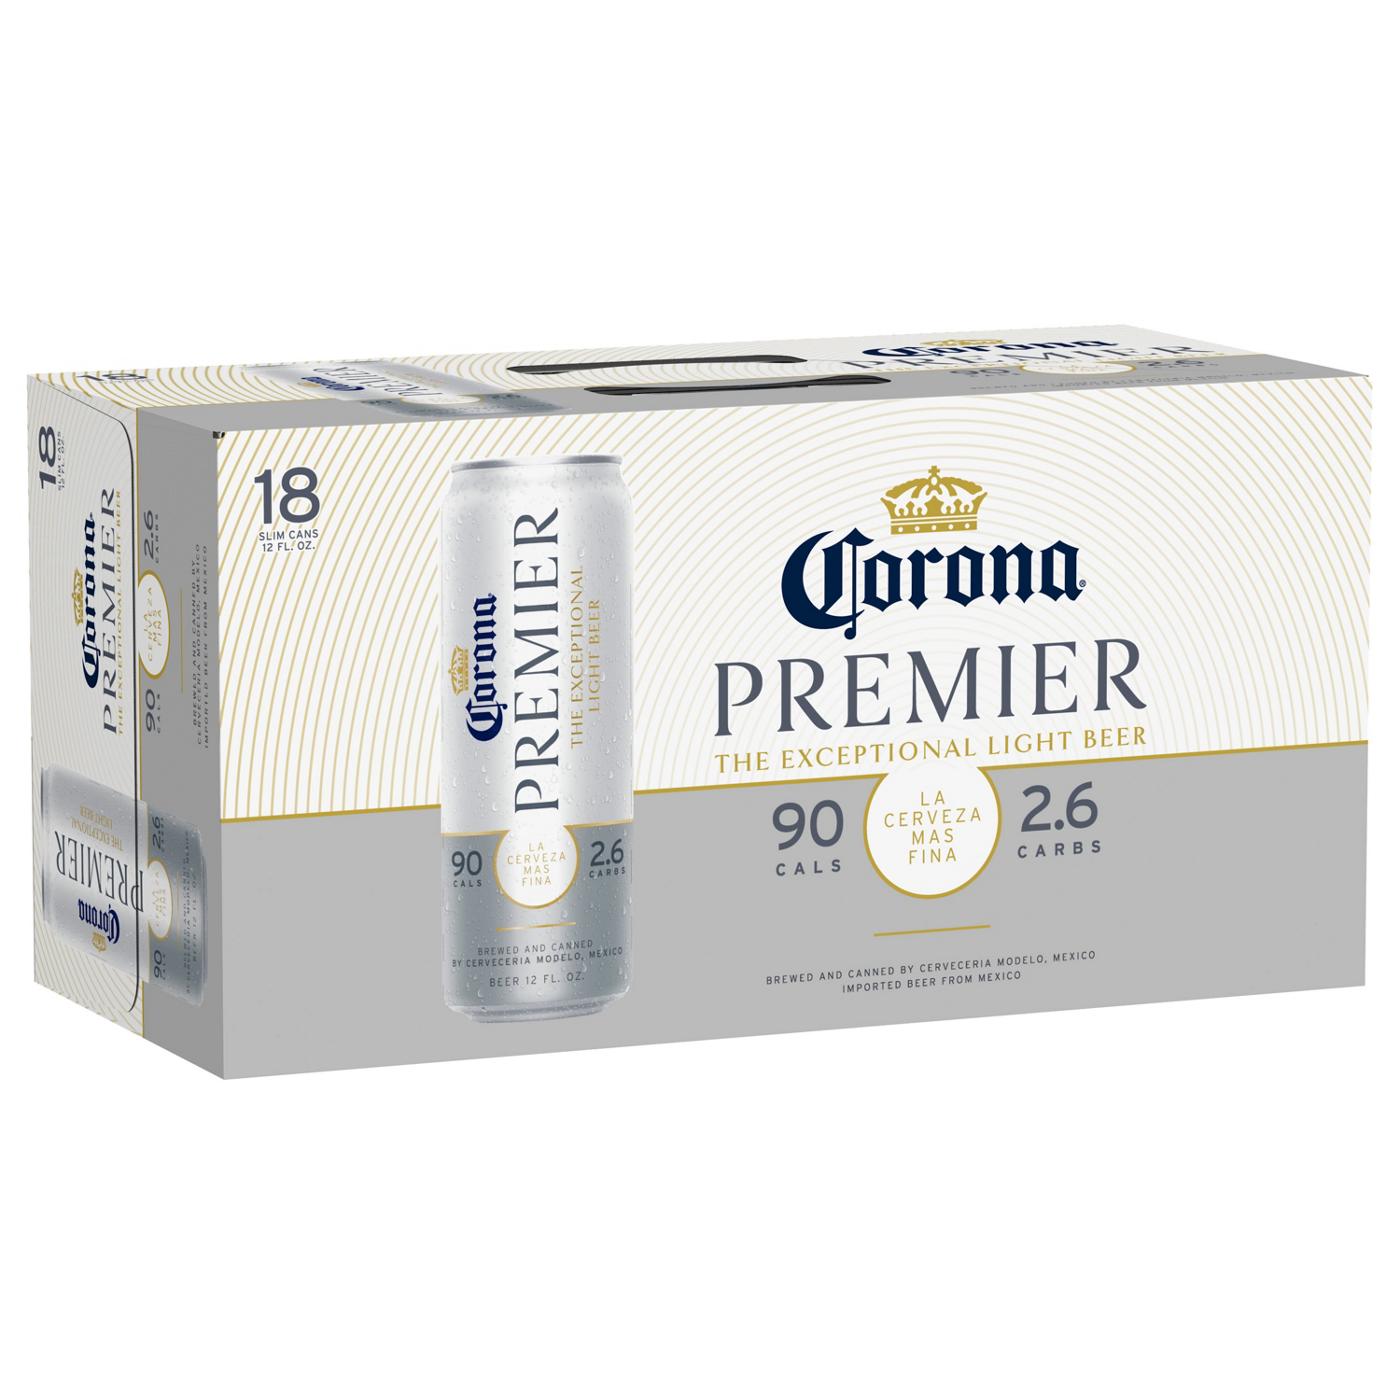 Corona Premier Mexican Lager Import Light Beer 12 oz Cans, 18 pk; image 1 of 9